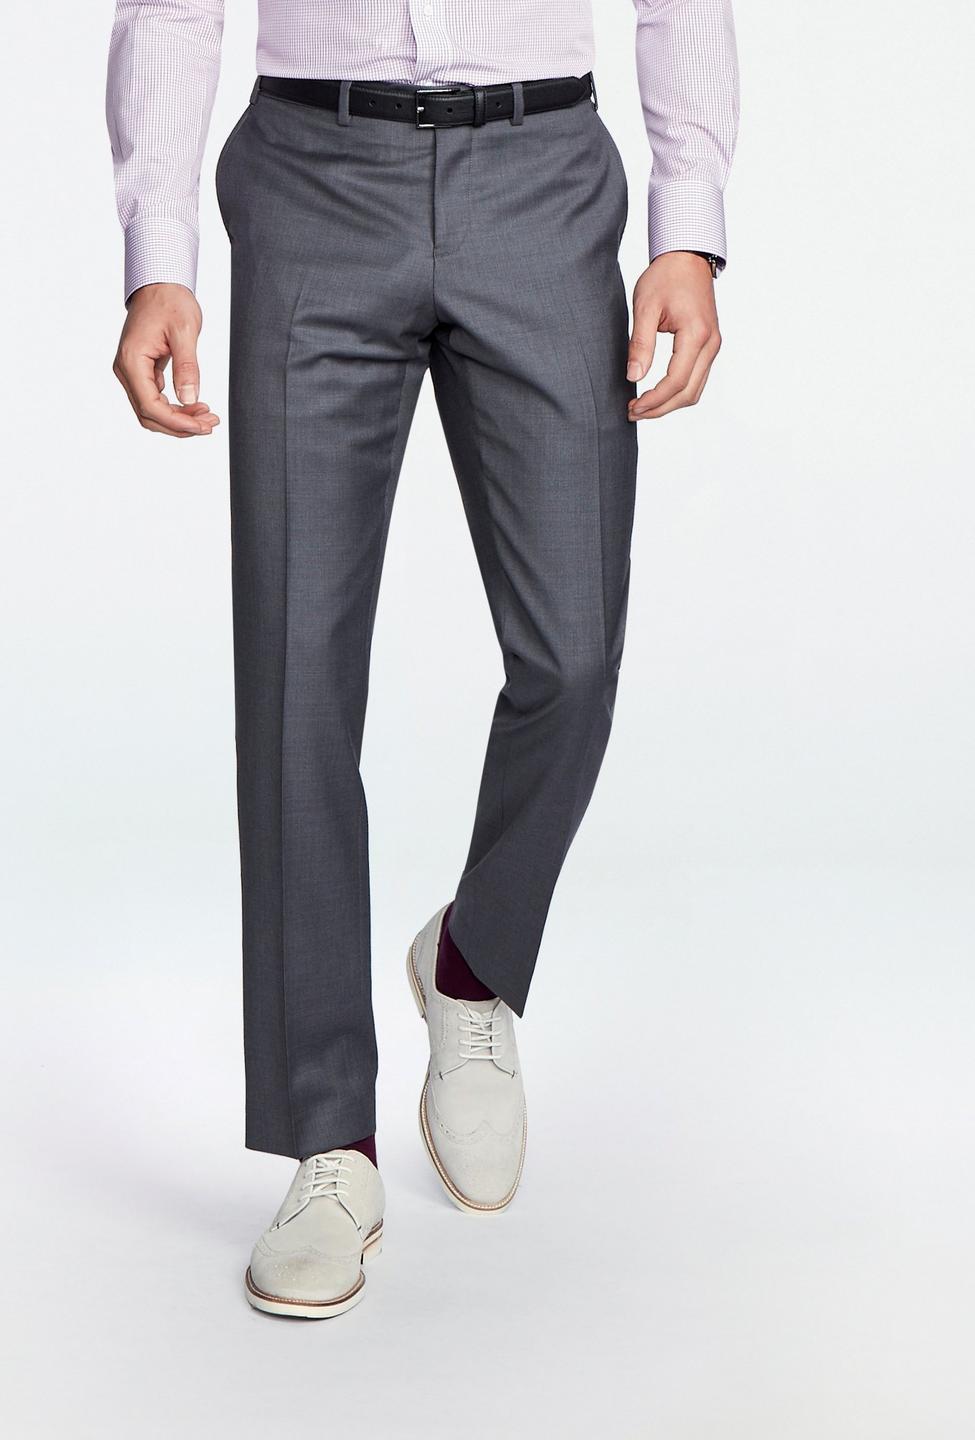 Gray pants - Hemsworth Solid Design from Premium Indochino Collection